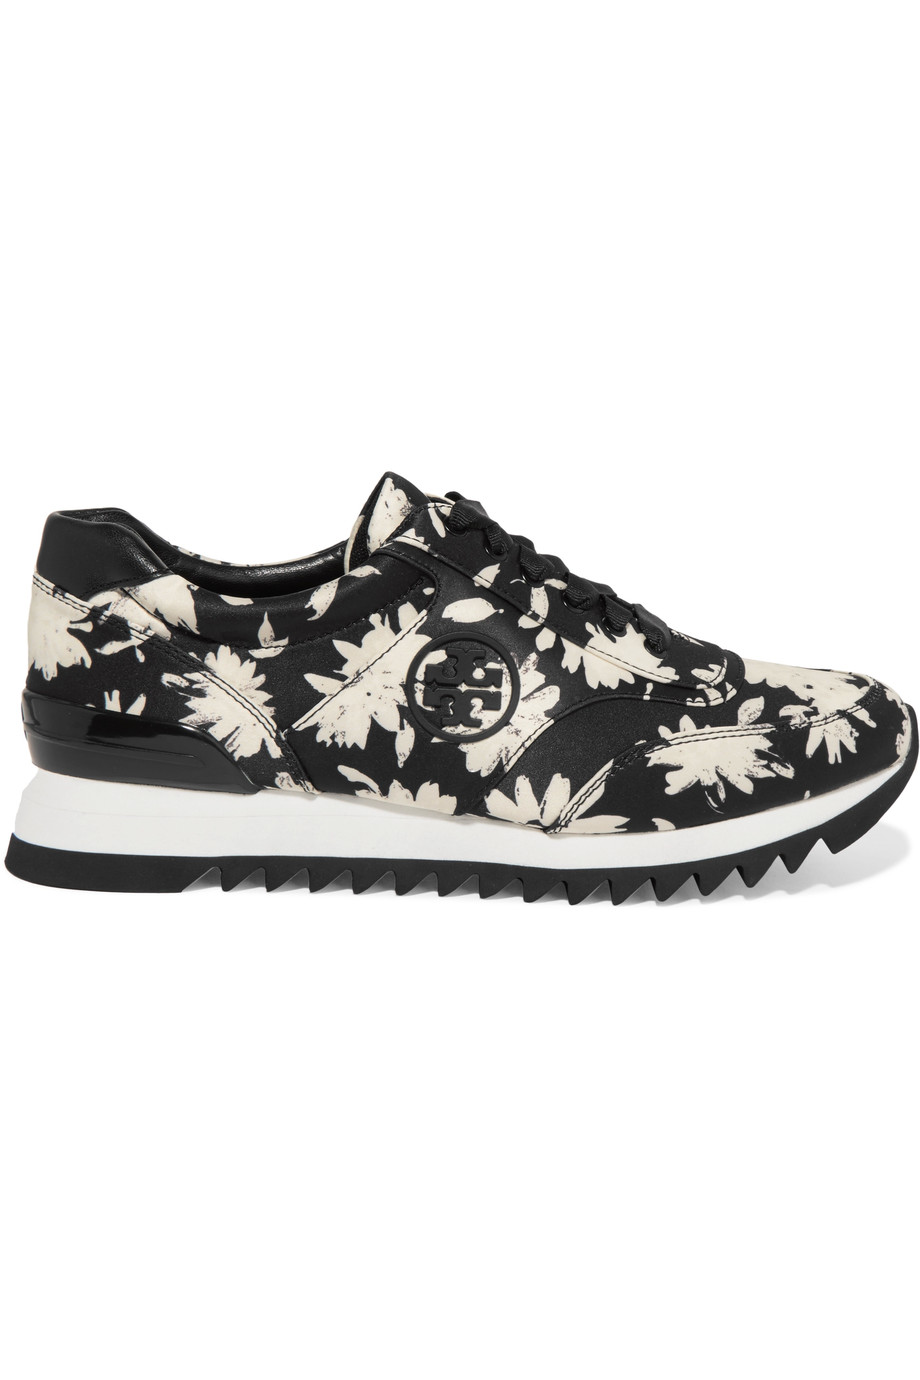 Tory Burch Leather-trimmed Printed Cotton-canvas Sneakers | ModeSens